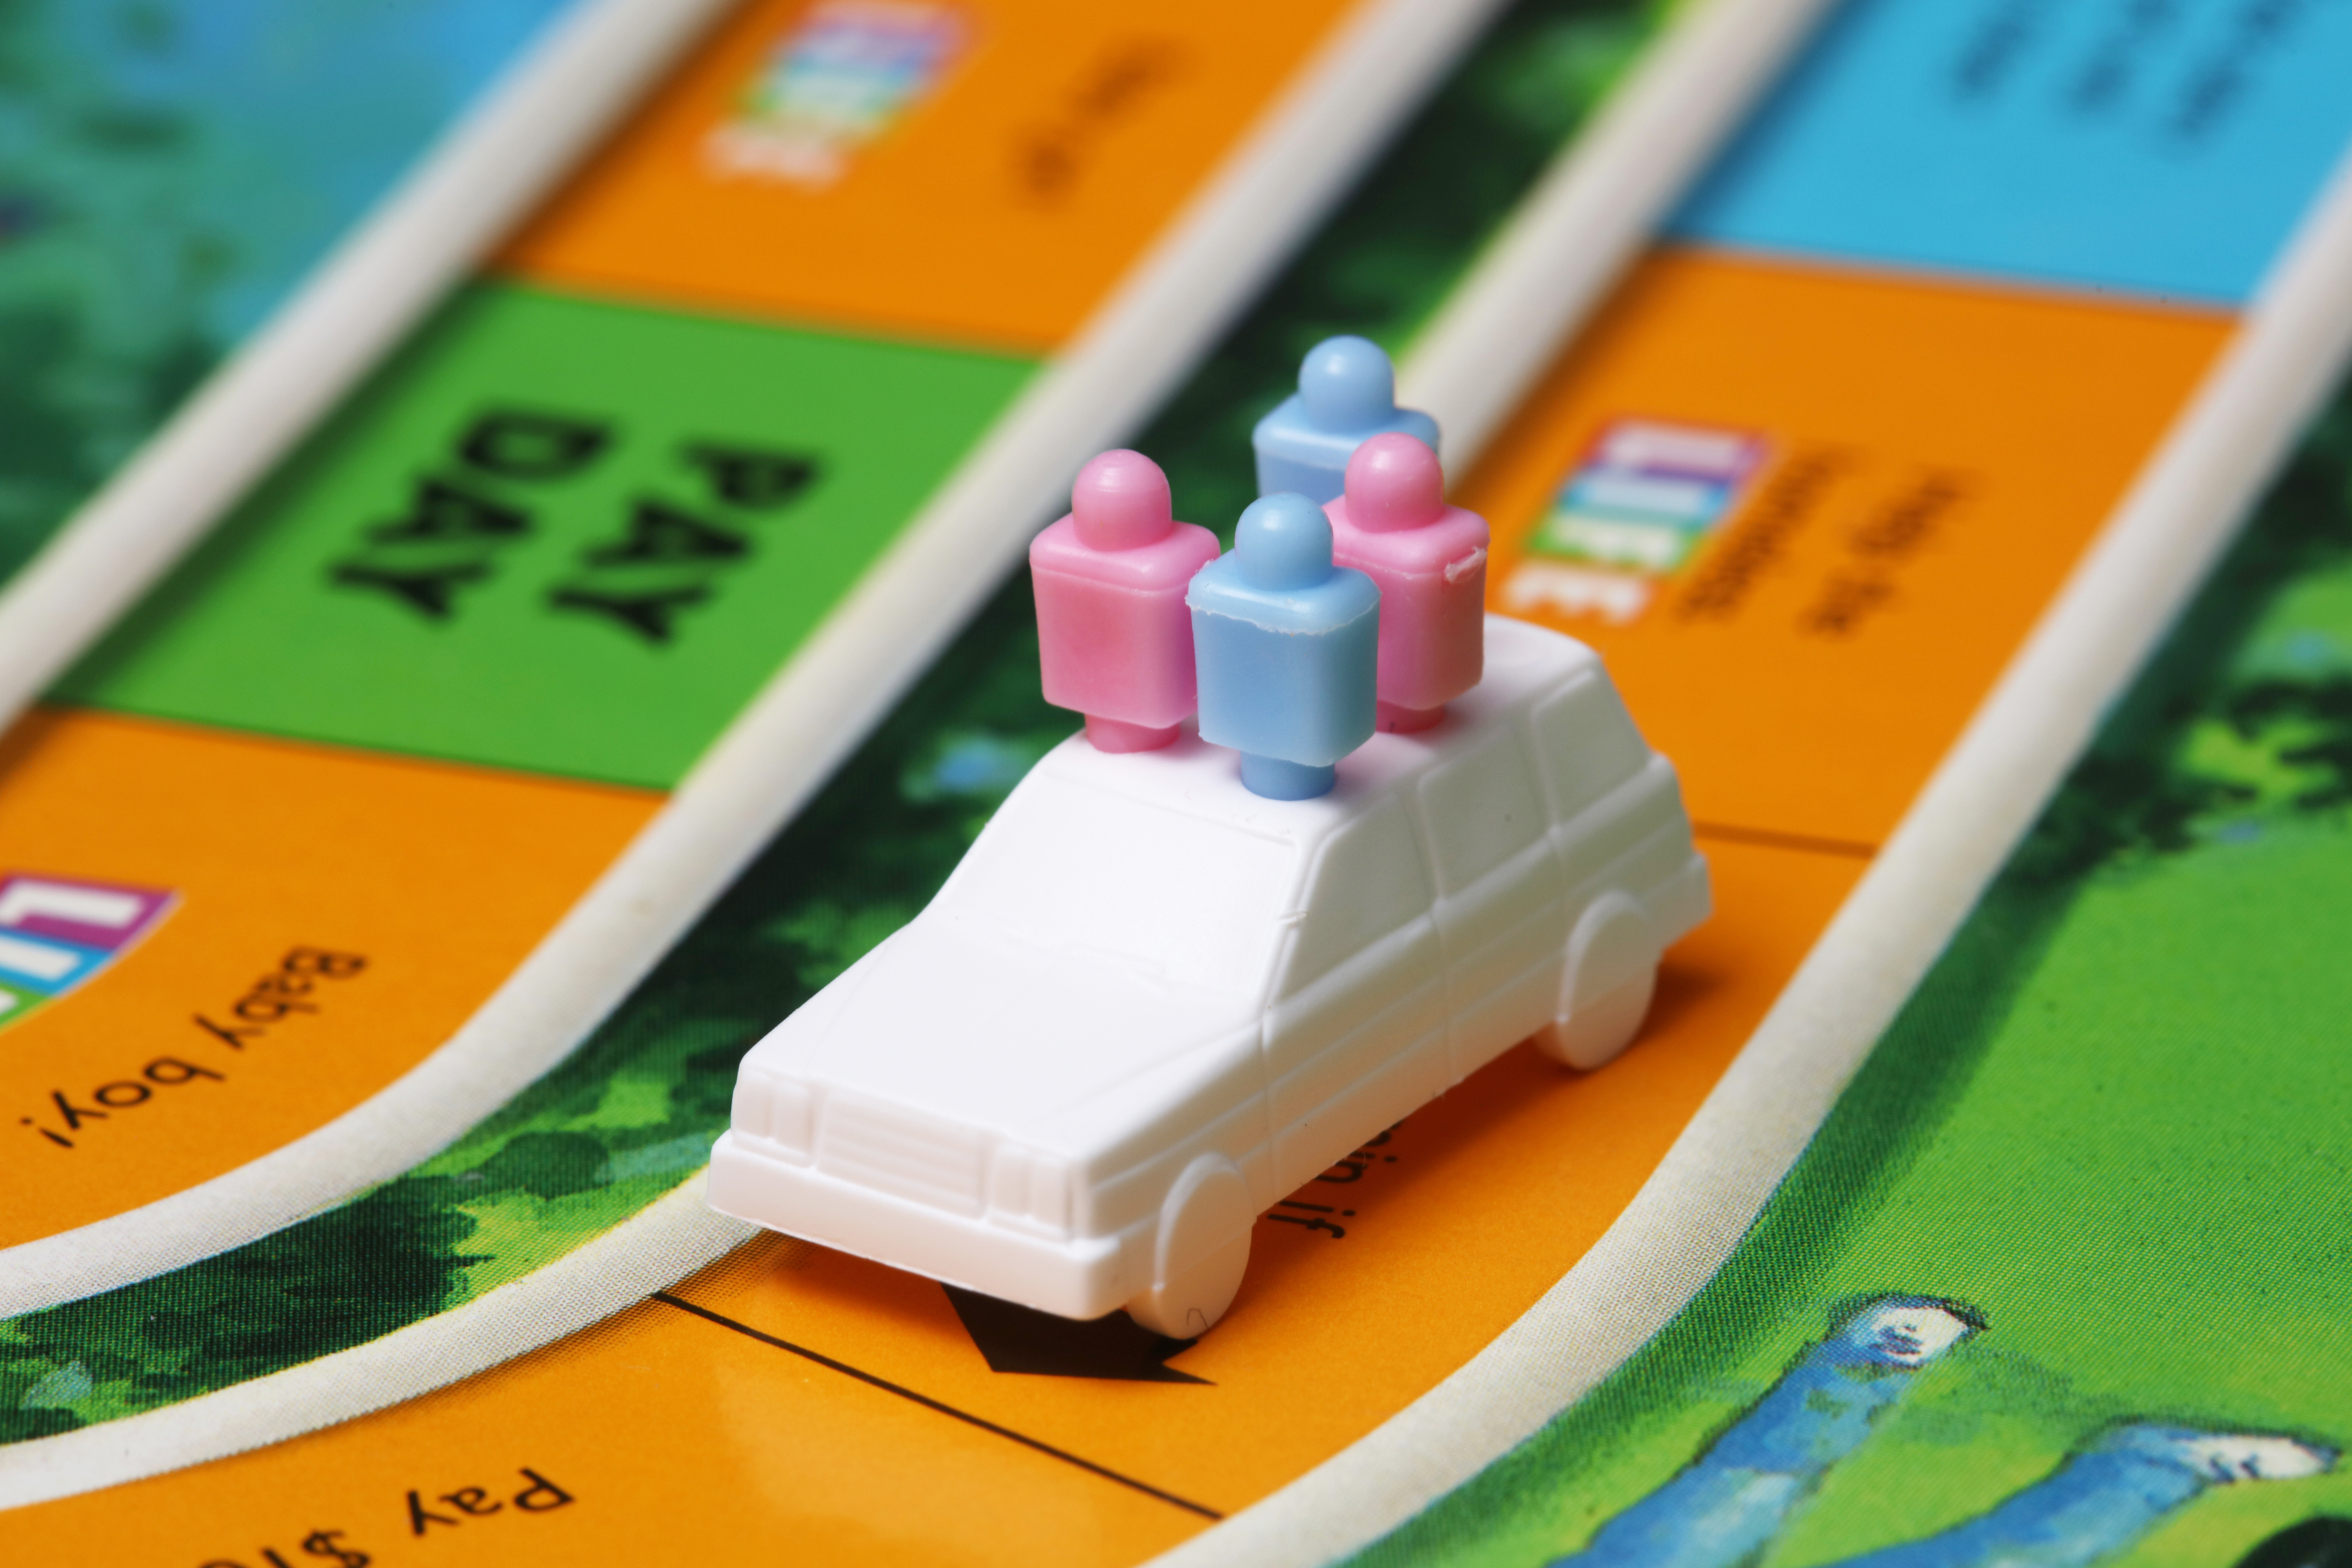 Close up photo of the board game Life. White plastic car with plastic peg people on the boardgame.